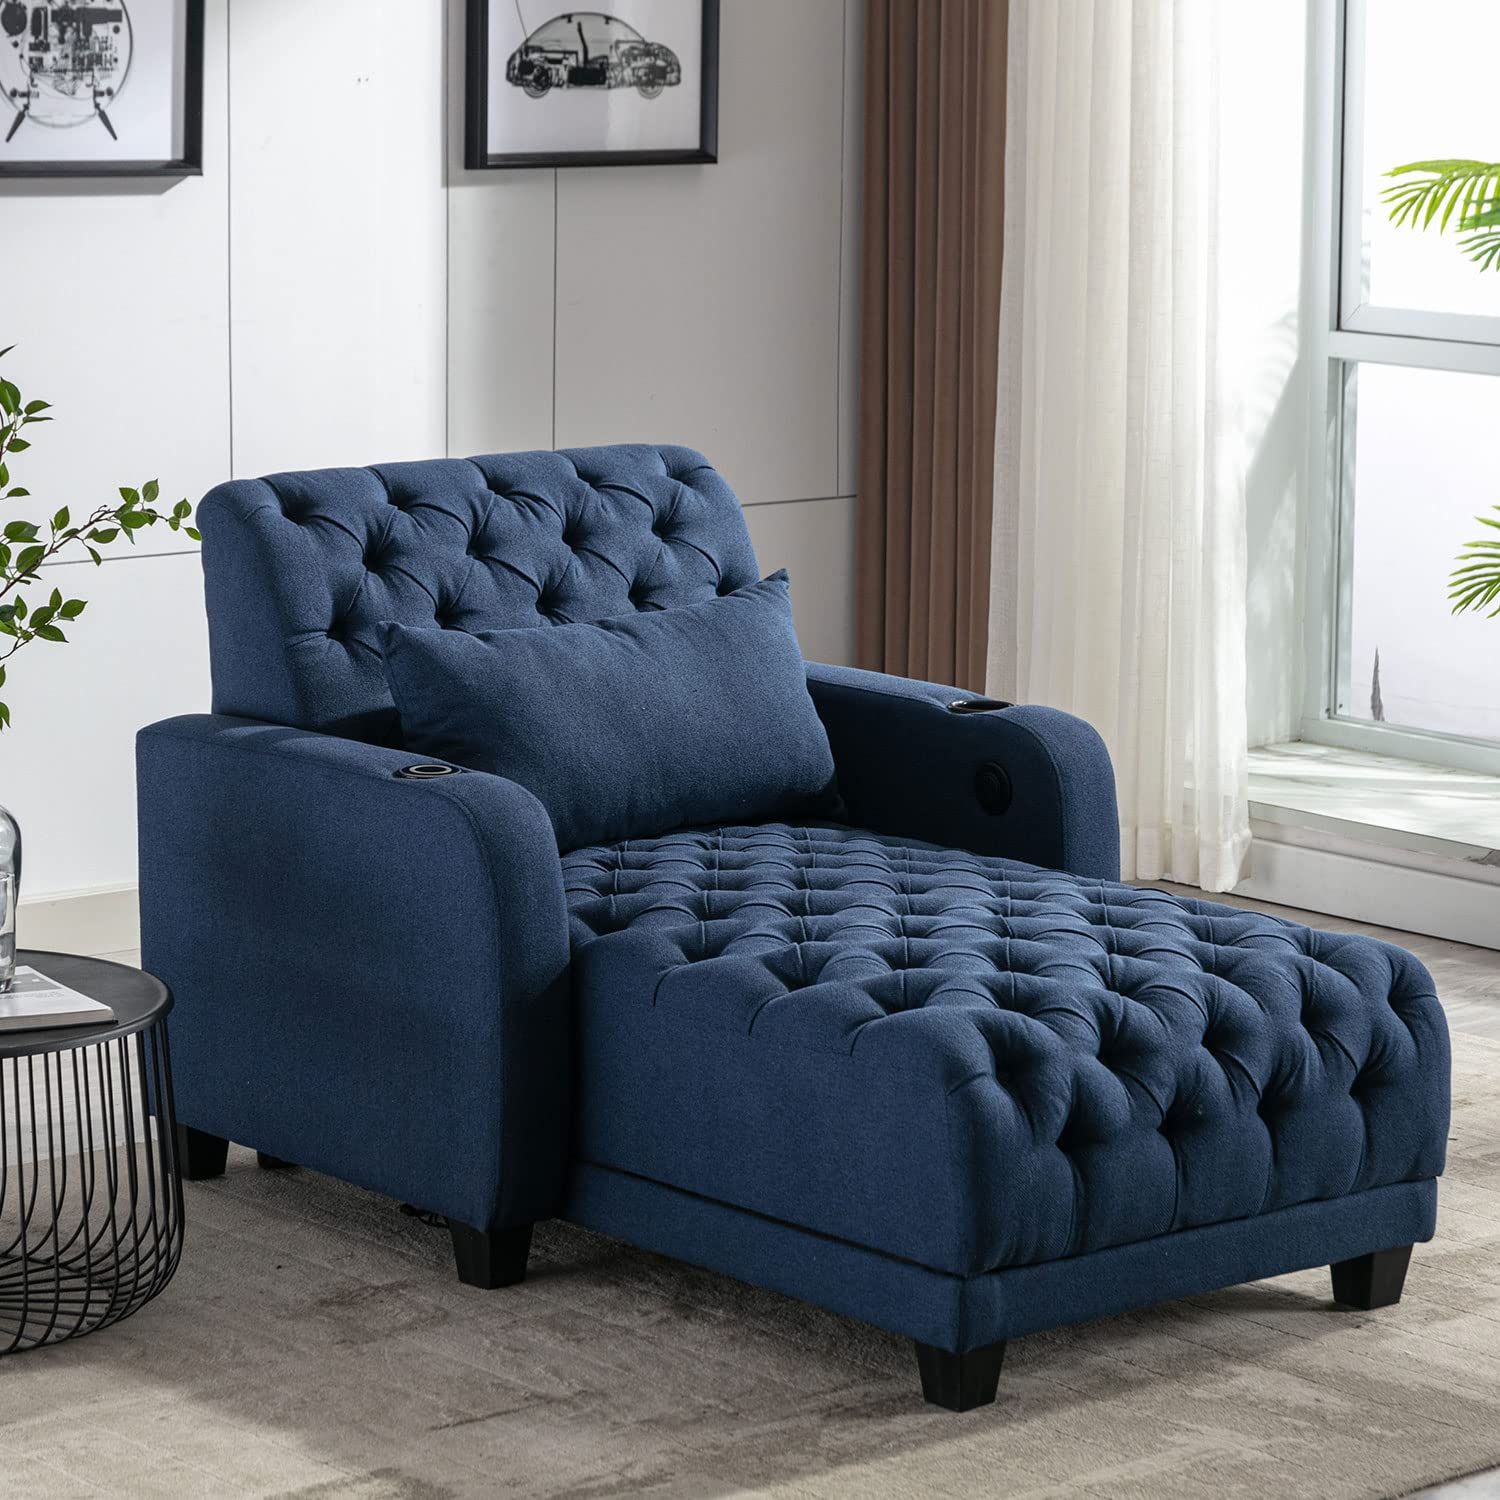 Ultimate Comfort: The Best Recliner Sofa
Chairs for Your Home